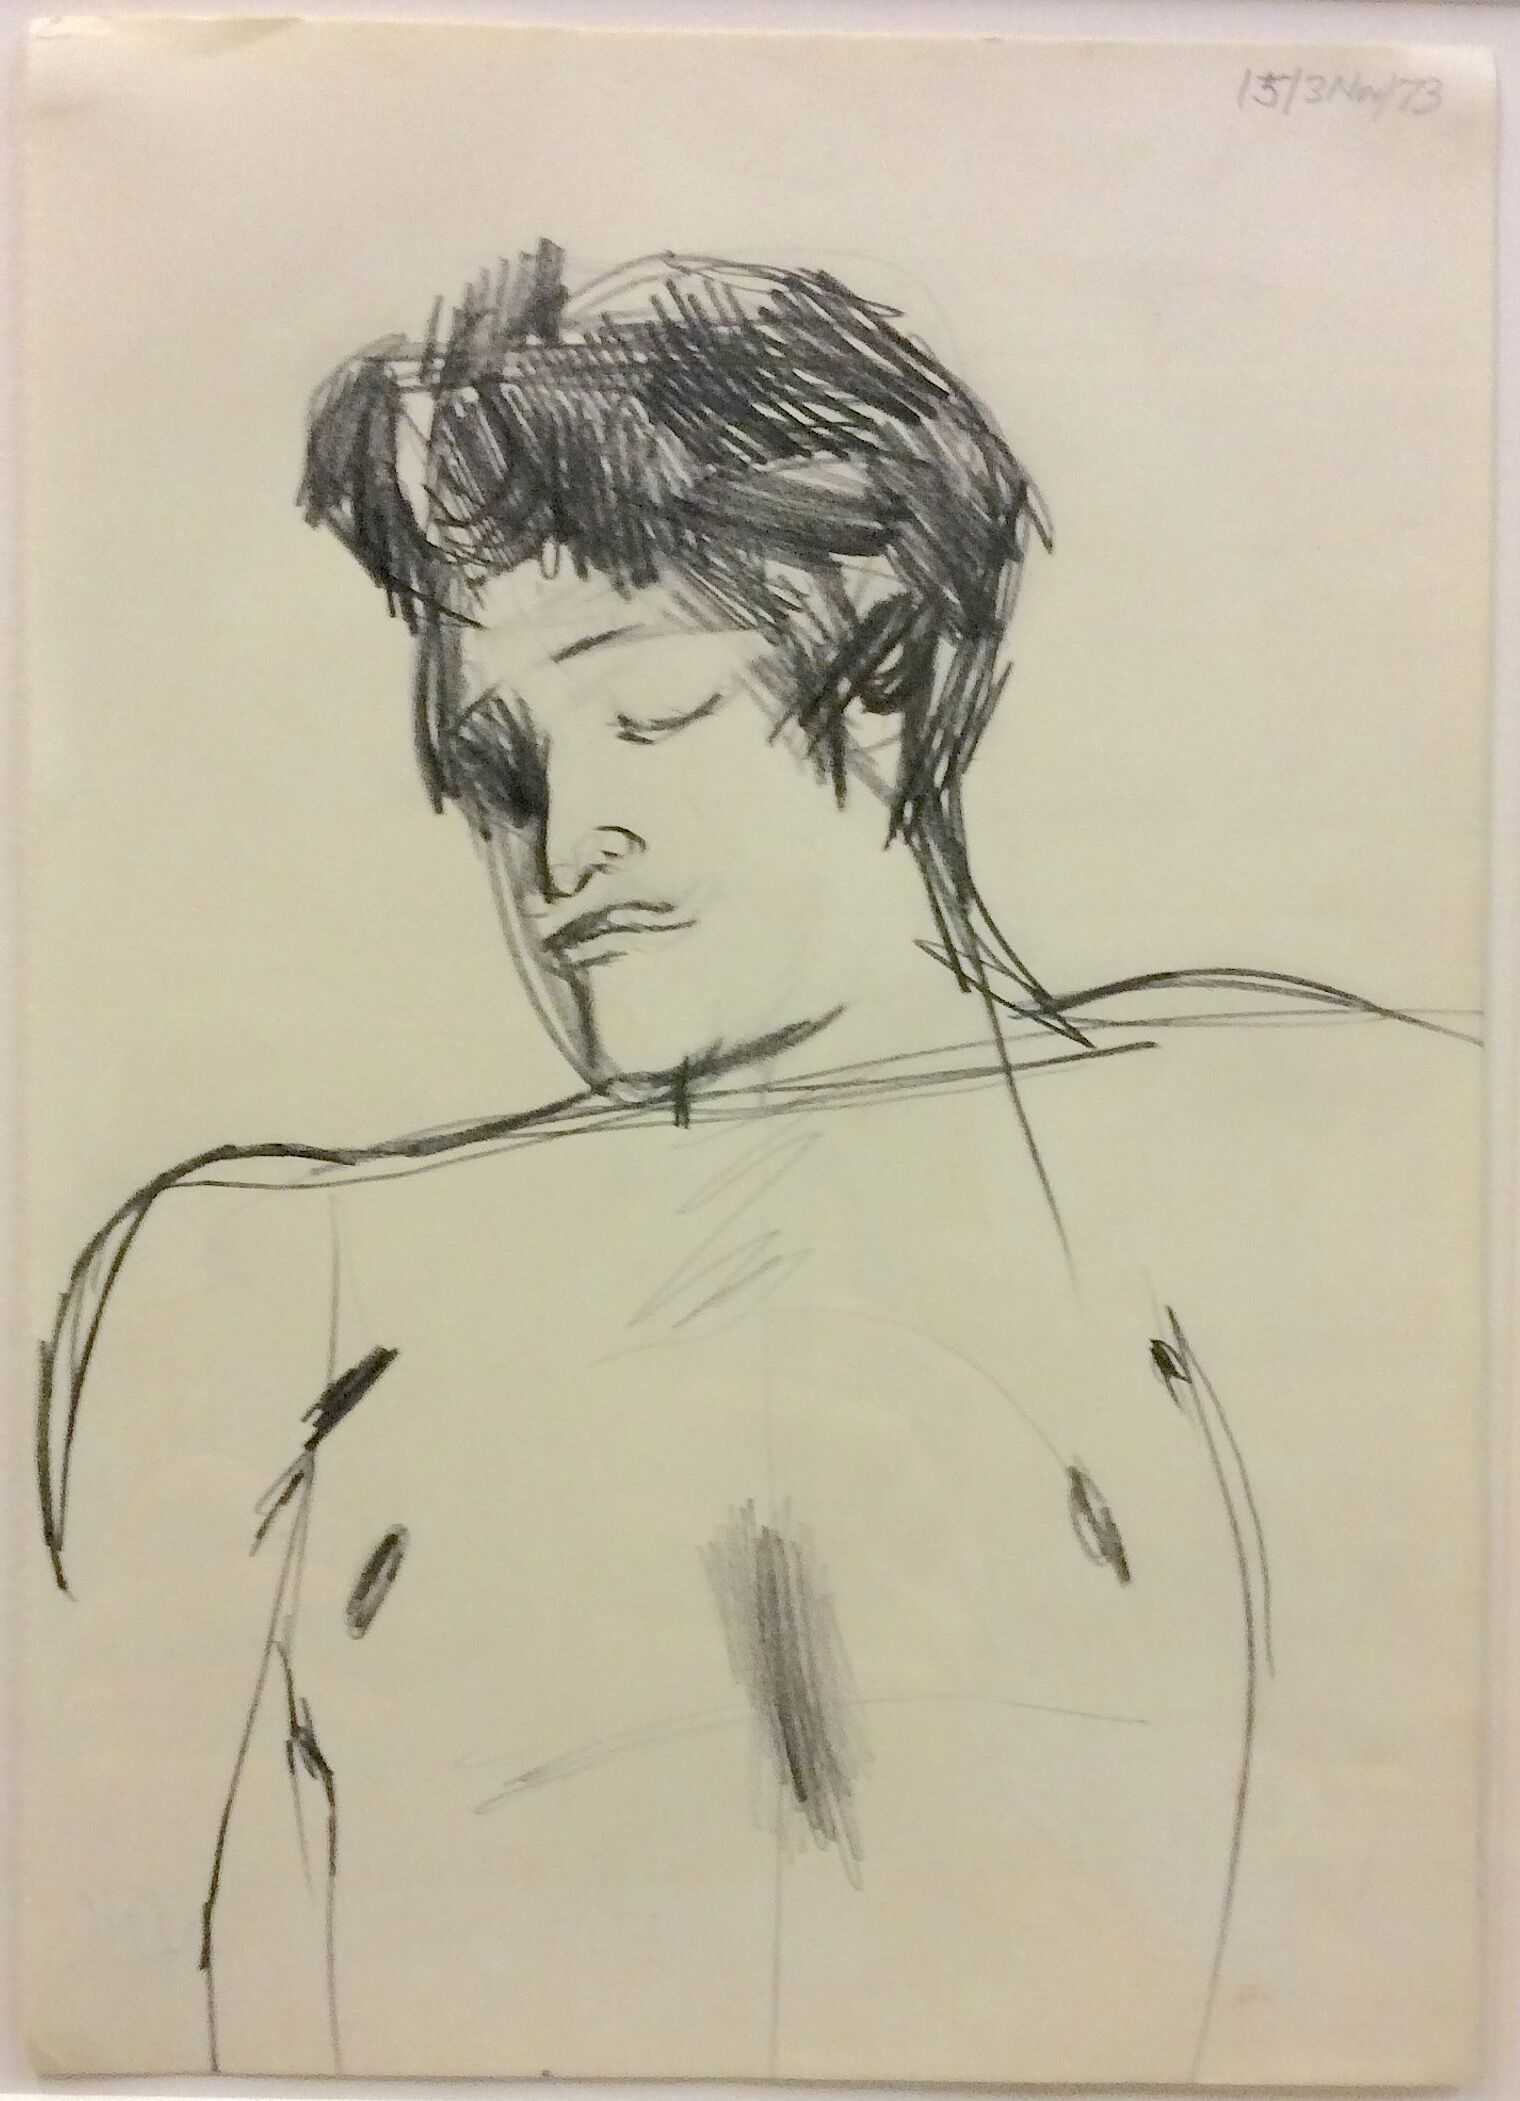 KEITH VAUGHAN [1912-77]. Sleeping Boy, 1973. Pencil drawing, signed with studio stamp initials on